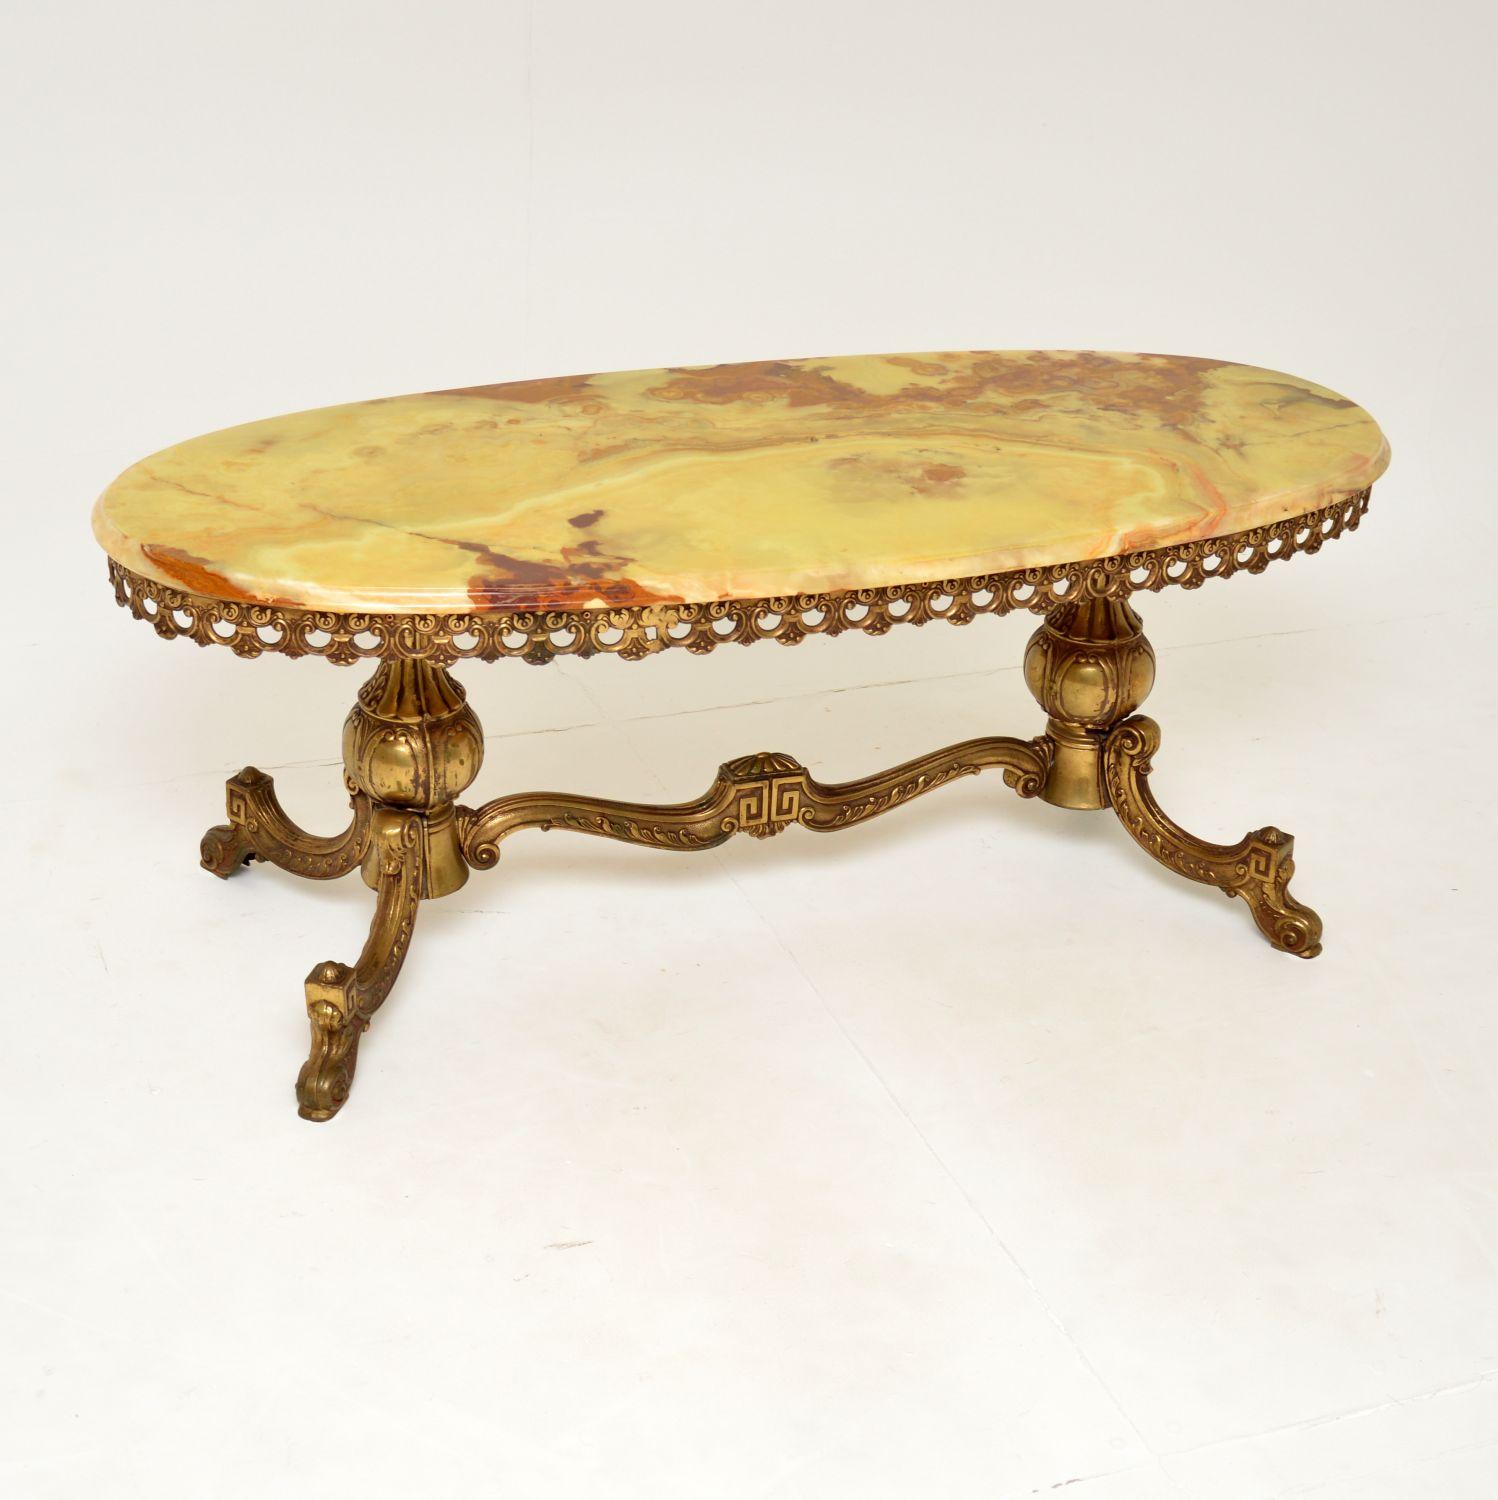 A beautiful antique coffee table with an ornate brass frame and gorgeous onyx top. This was made in France, it dates from around the 1950’s.

It’s of fabulous quality, with intricate details in the base, the onyx top has stunning colours and